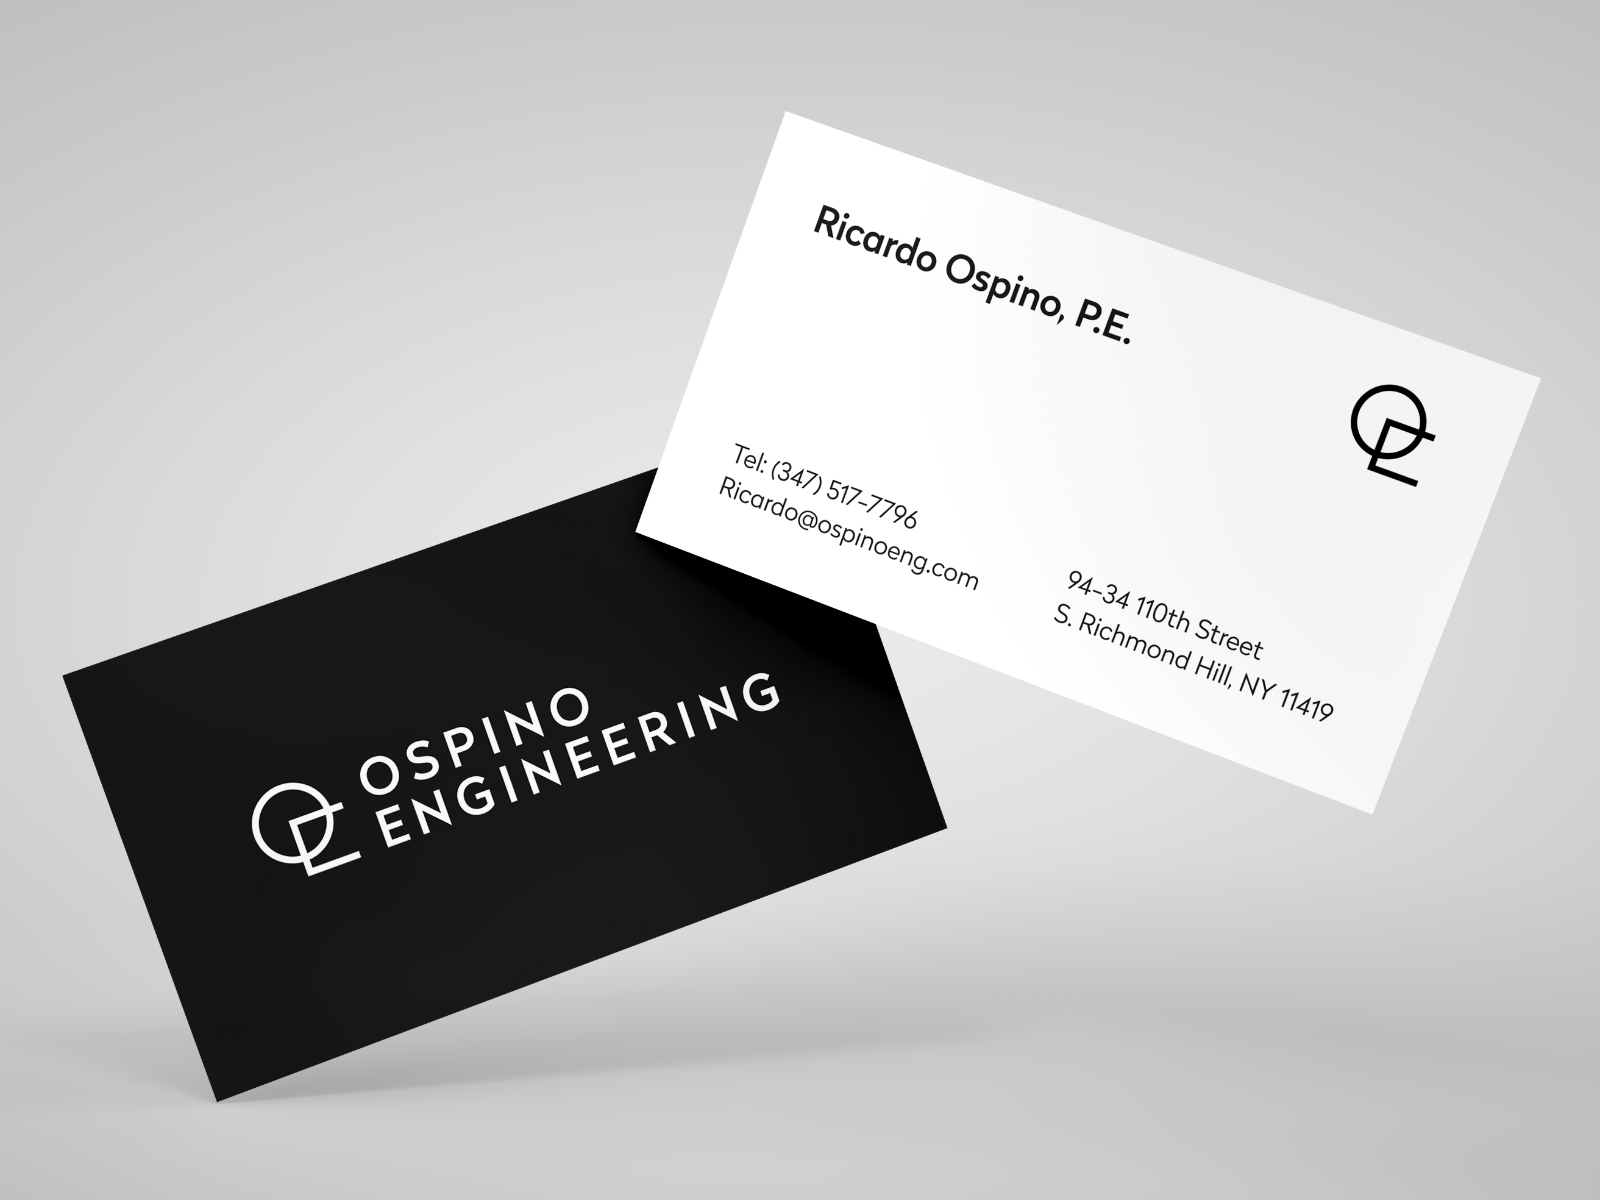 Ospino Engineering - Business Cards